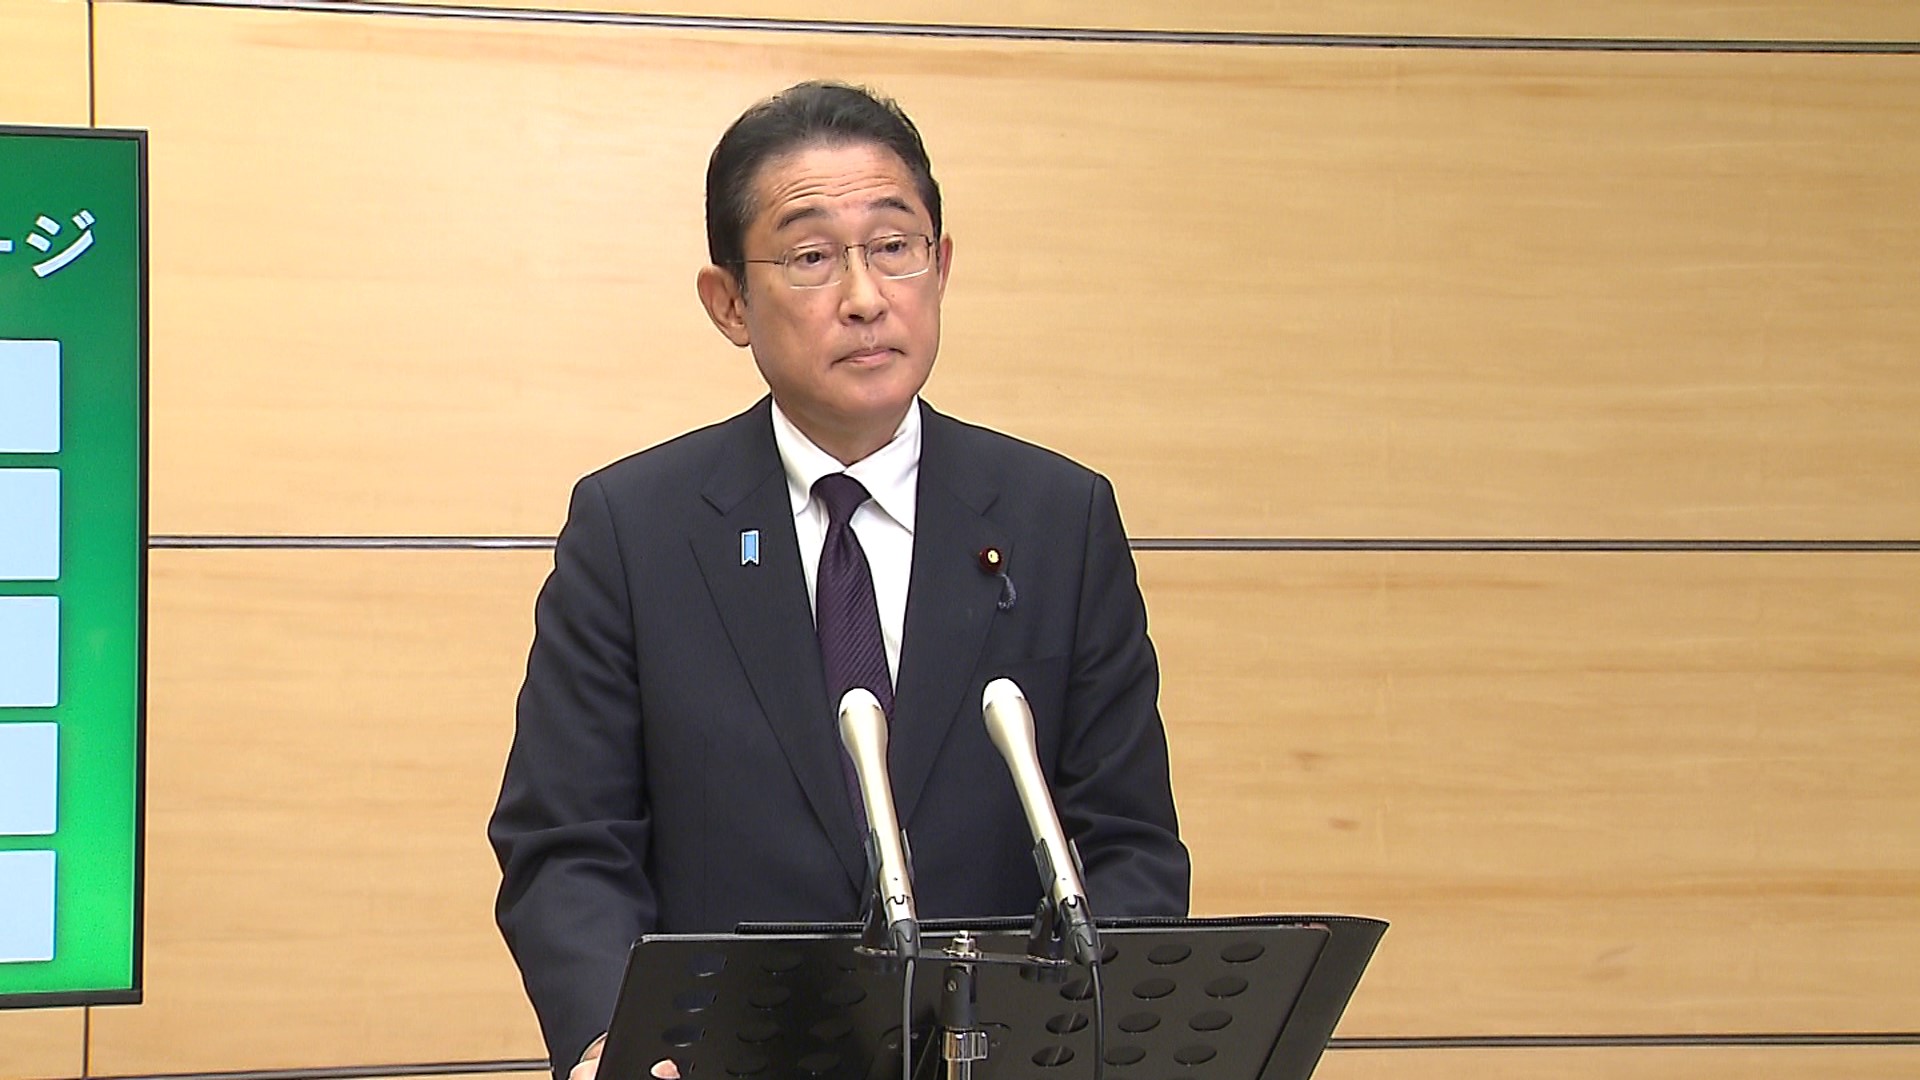 Press Conference by Prime Minister Kishida regarding the Response to China's Suspension of Imports of Marine Products and Support Measures to Protect the Fisheries Industry and Other Matters